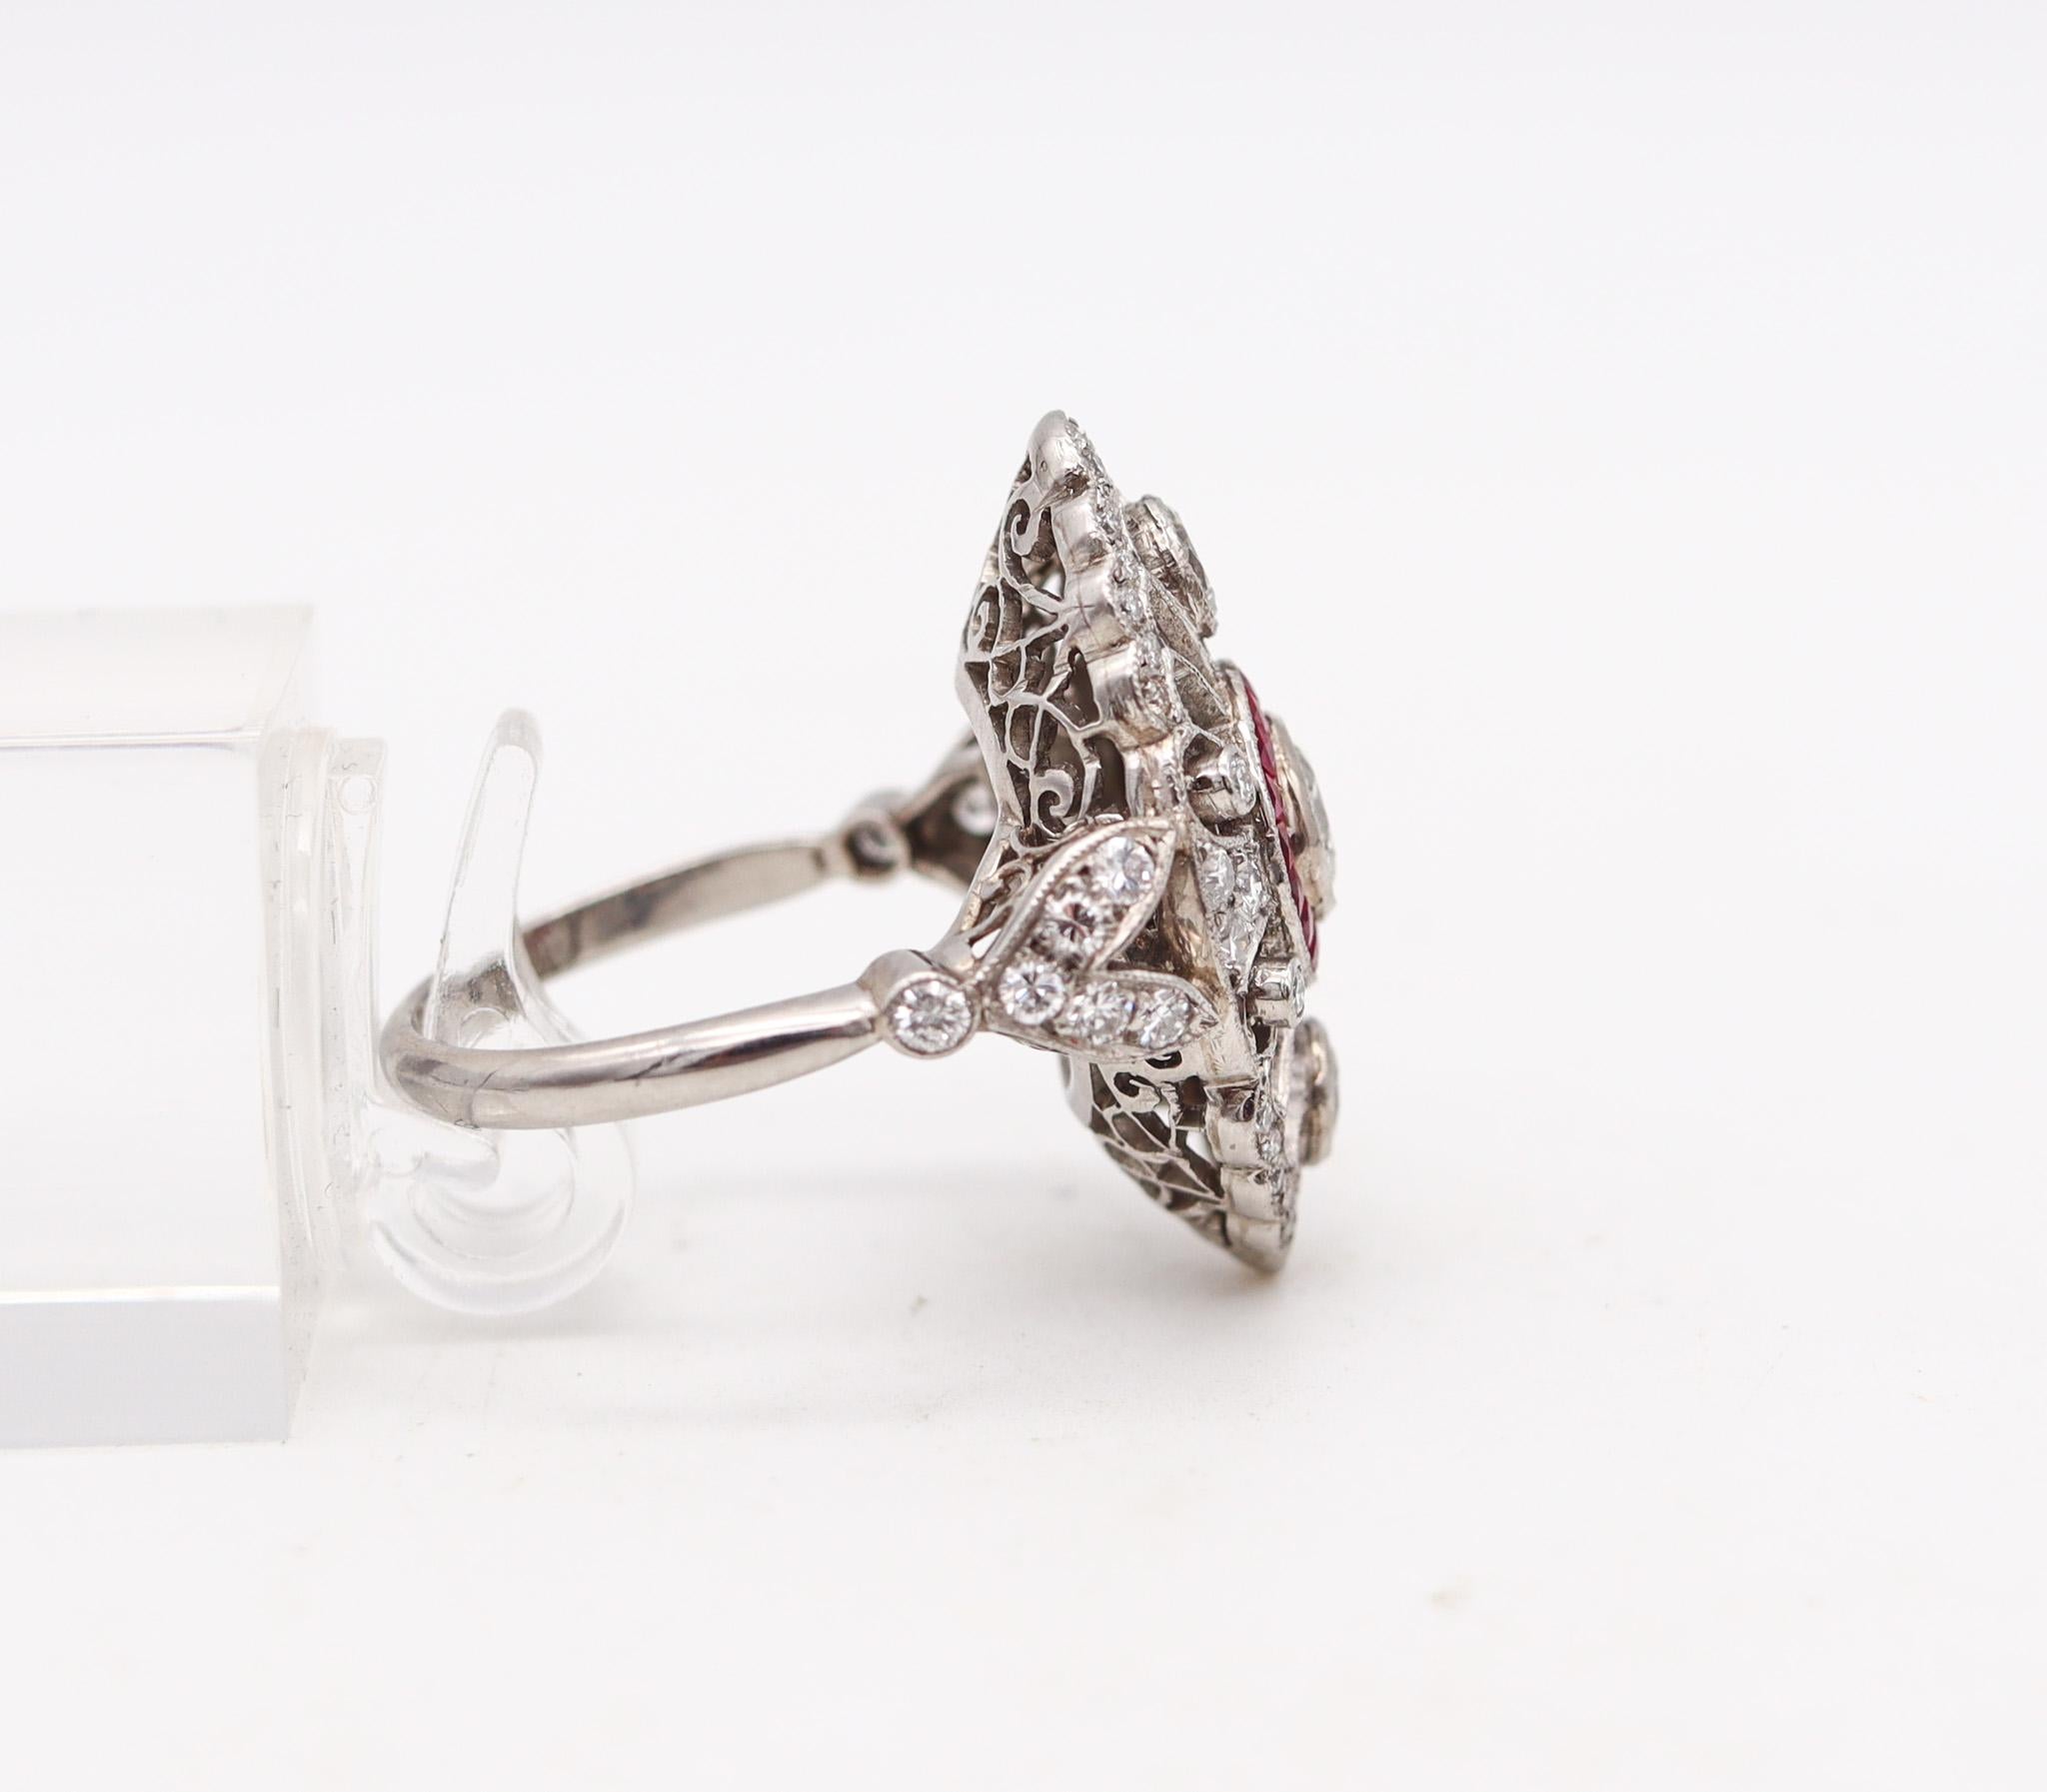 Mixed Cut Art Deco 1930 Cocktail Ring In Platinum With 2.92 Ctw In Diamonds And Rubies For Sale